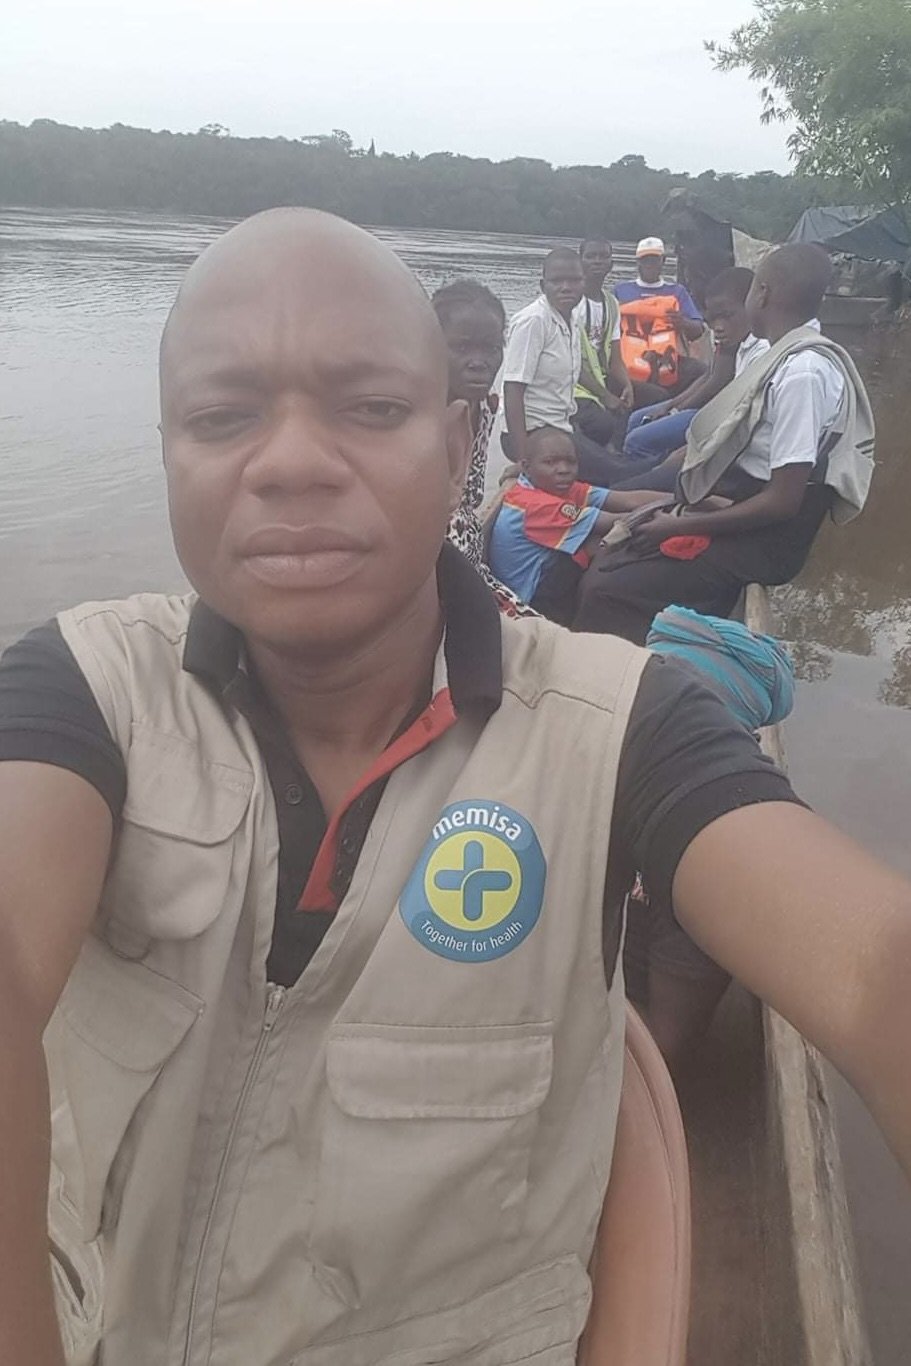 Jean Ilunga crossing the Kwilu River in the Democratic Republic of Congo by canoe after a supervision and financial control mission on behalf of the international NGO Memisa Belgium, 2018 